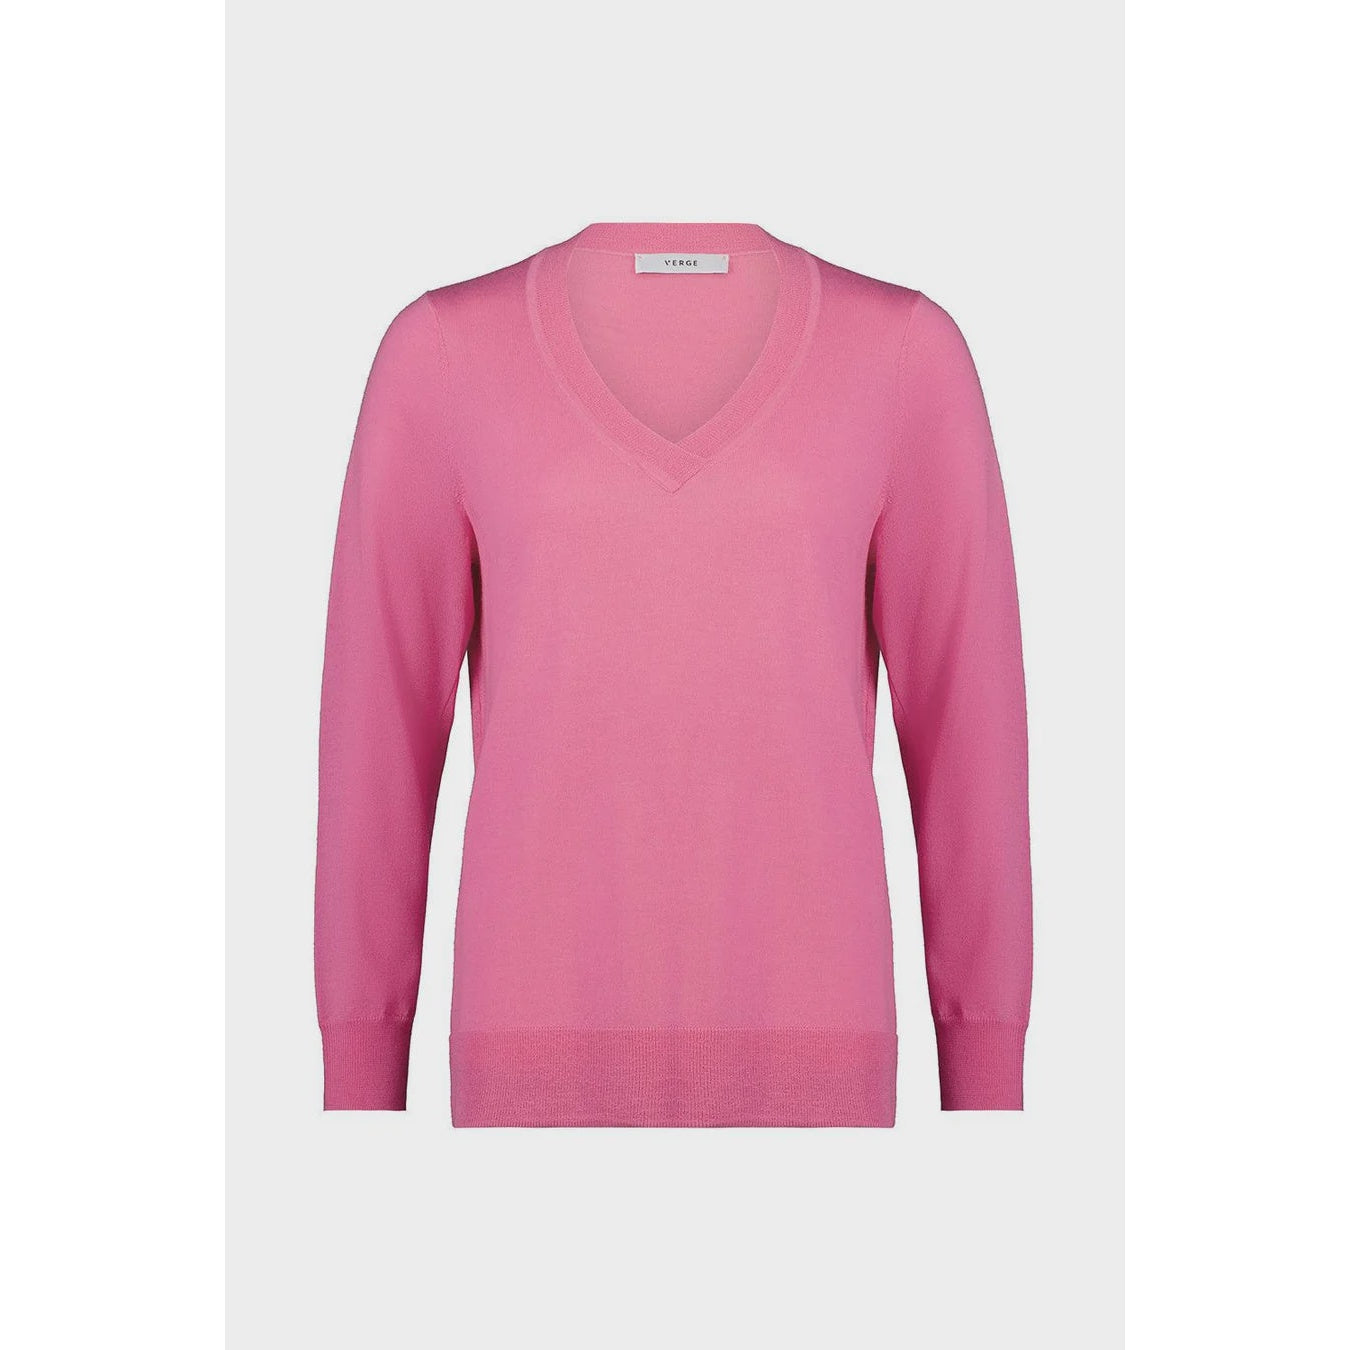 Verge Network Sweater - Pink Panther